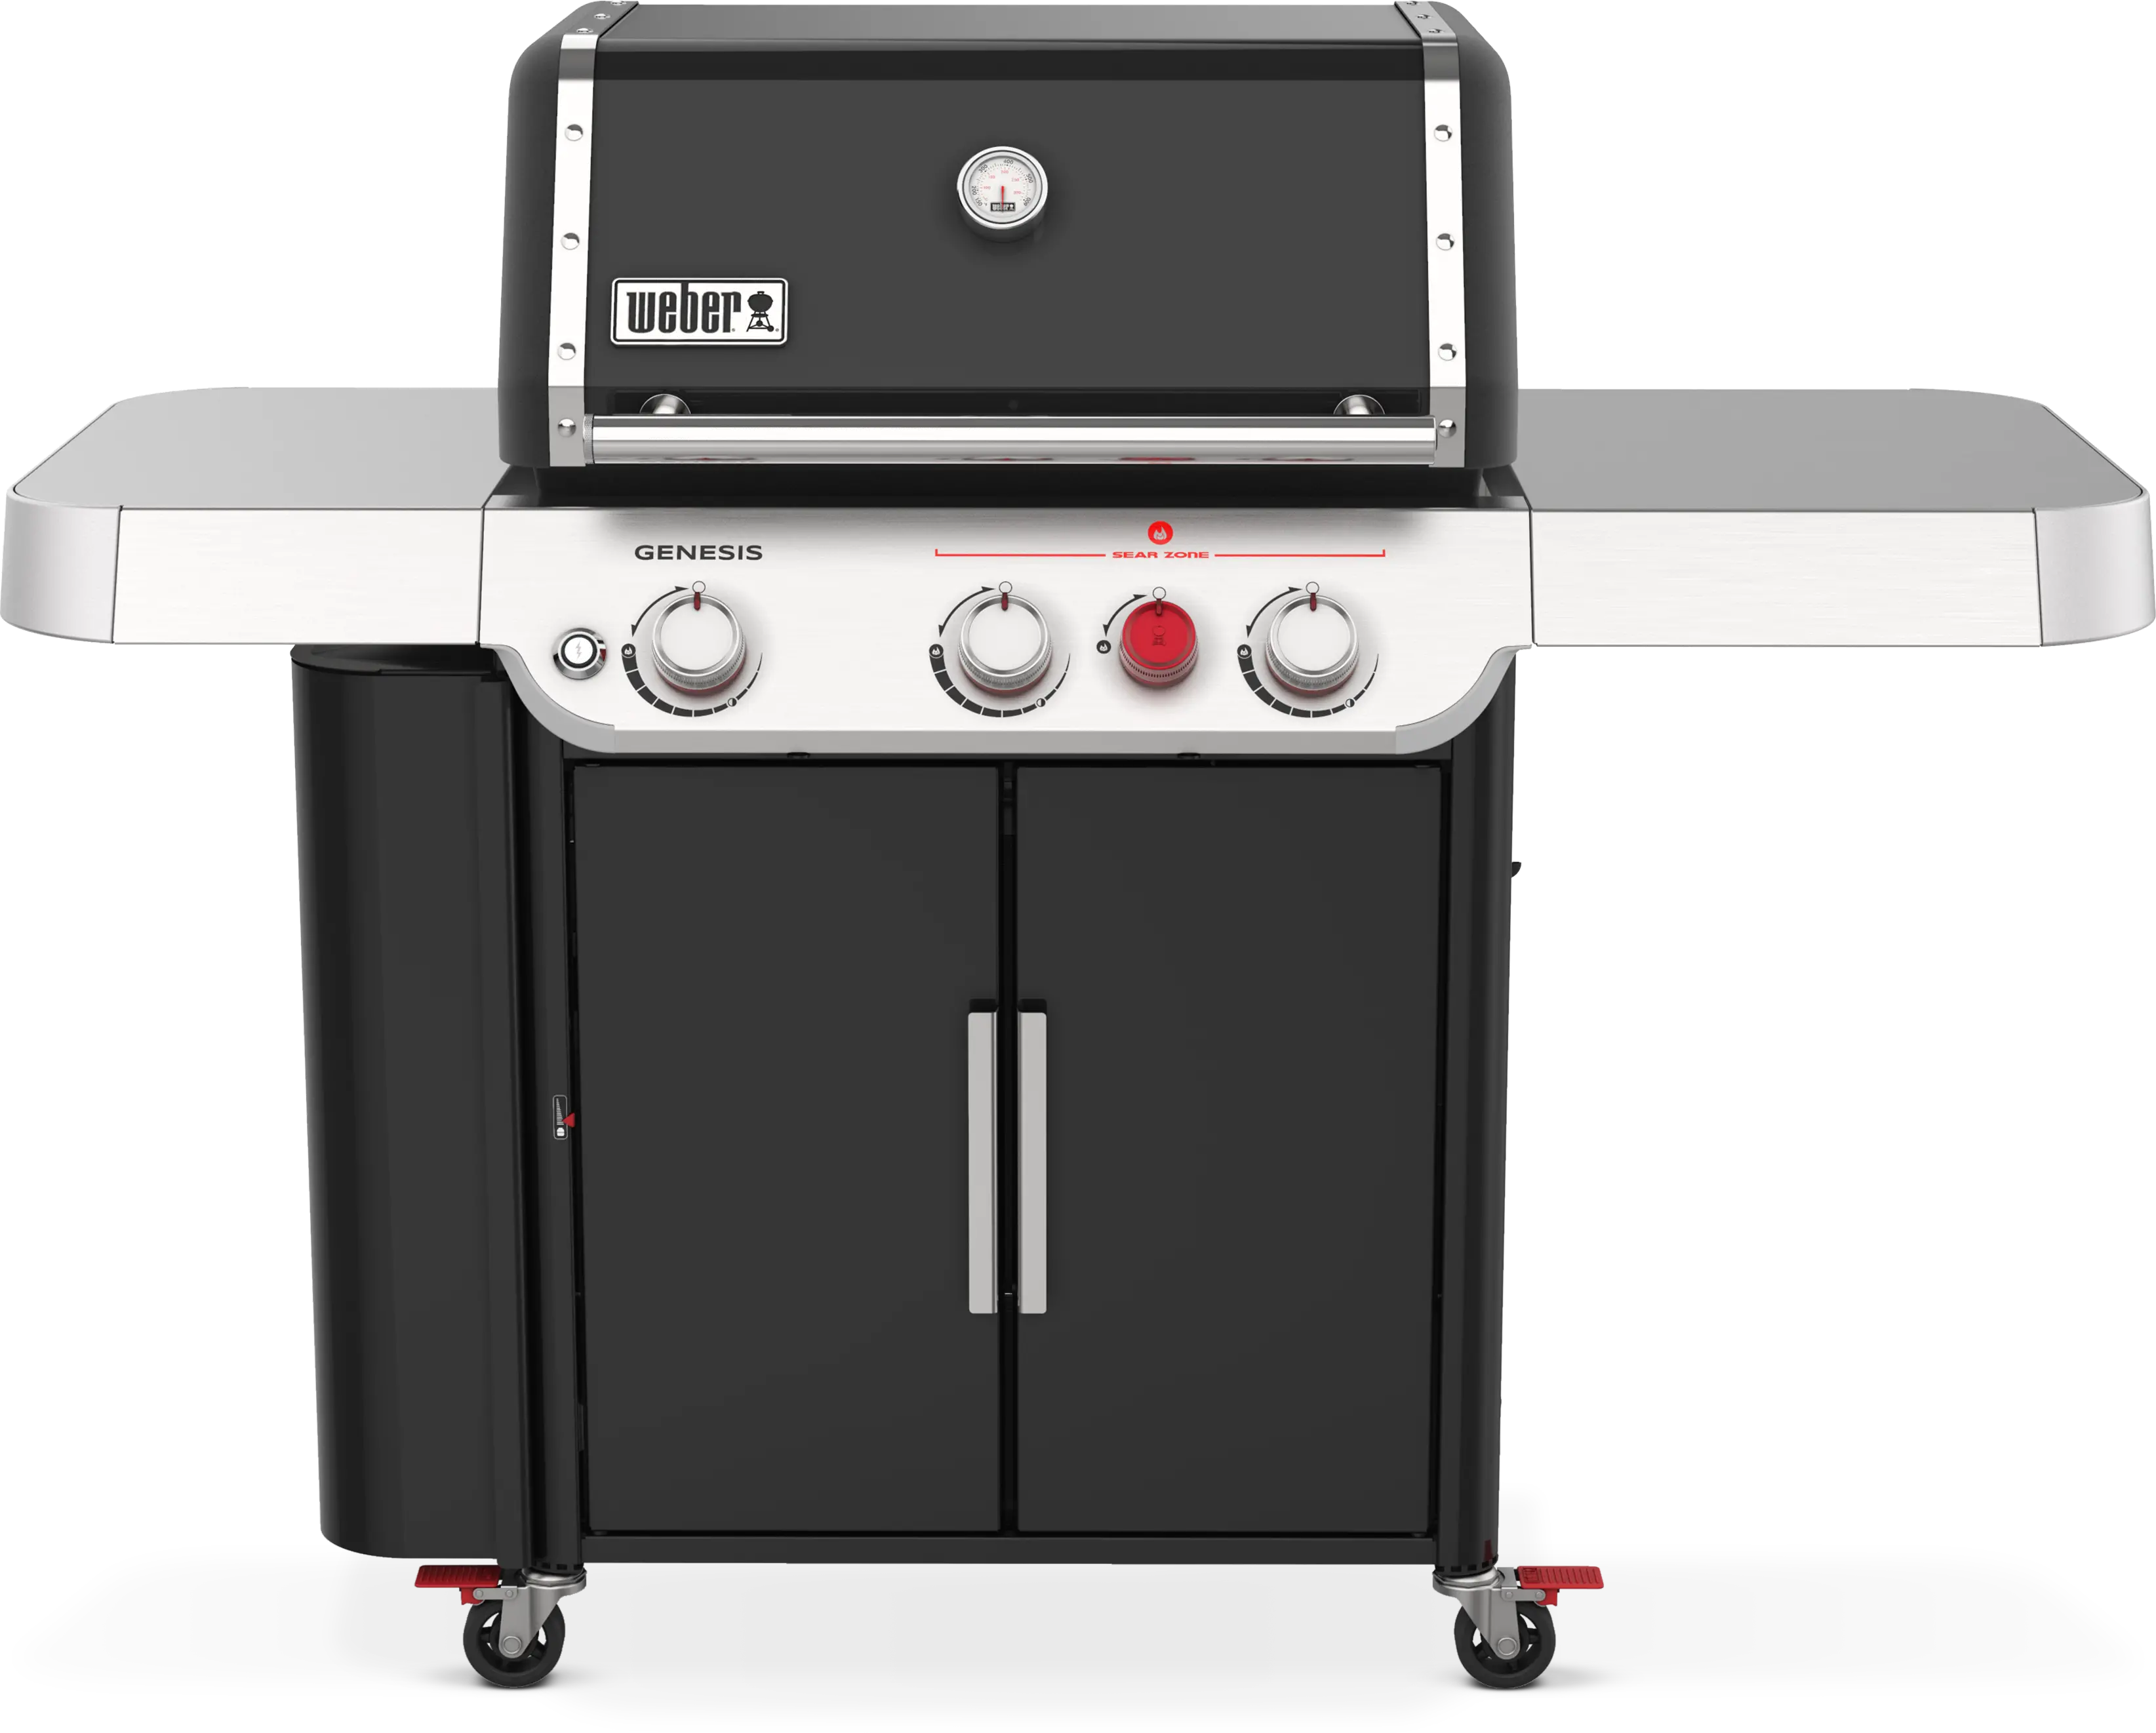 https://static.rcwilley.com/products/112589308/Weber-Genesis-SI-E-330-Black-Liquid-Propane-Grill-rcwilley-image1.webp